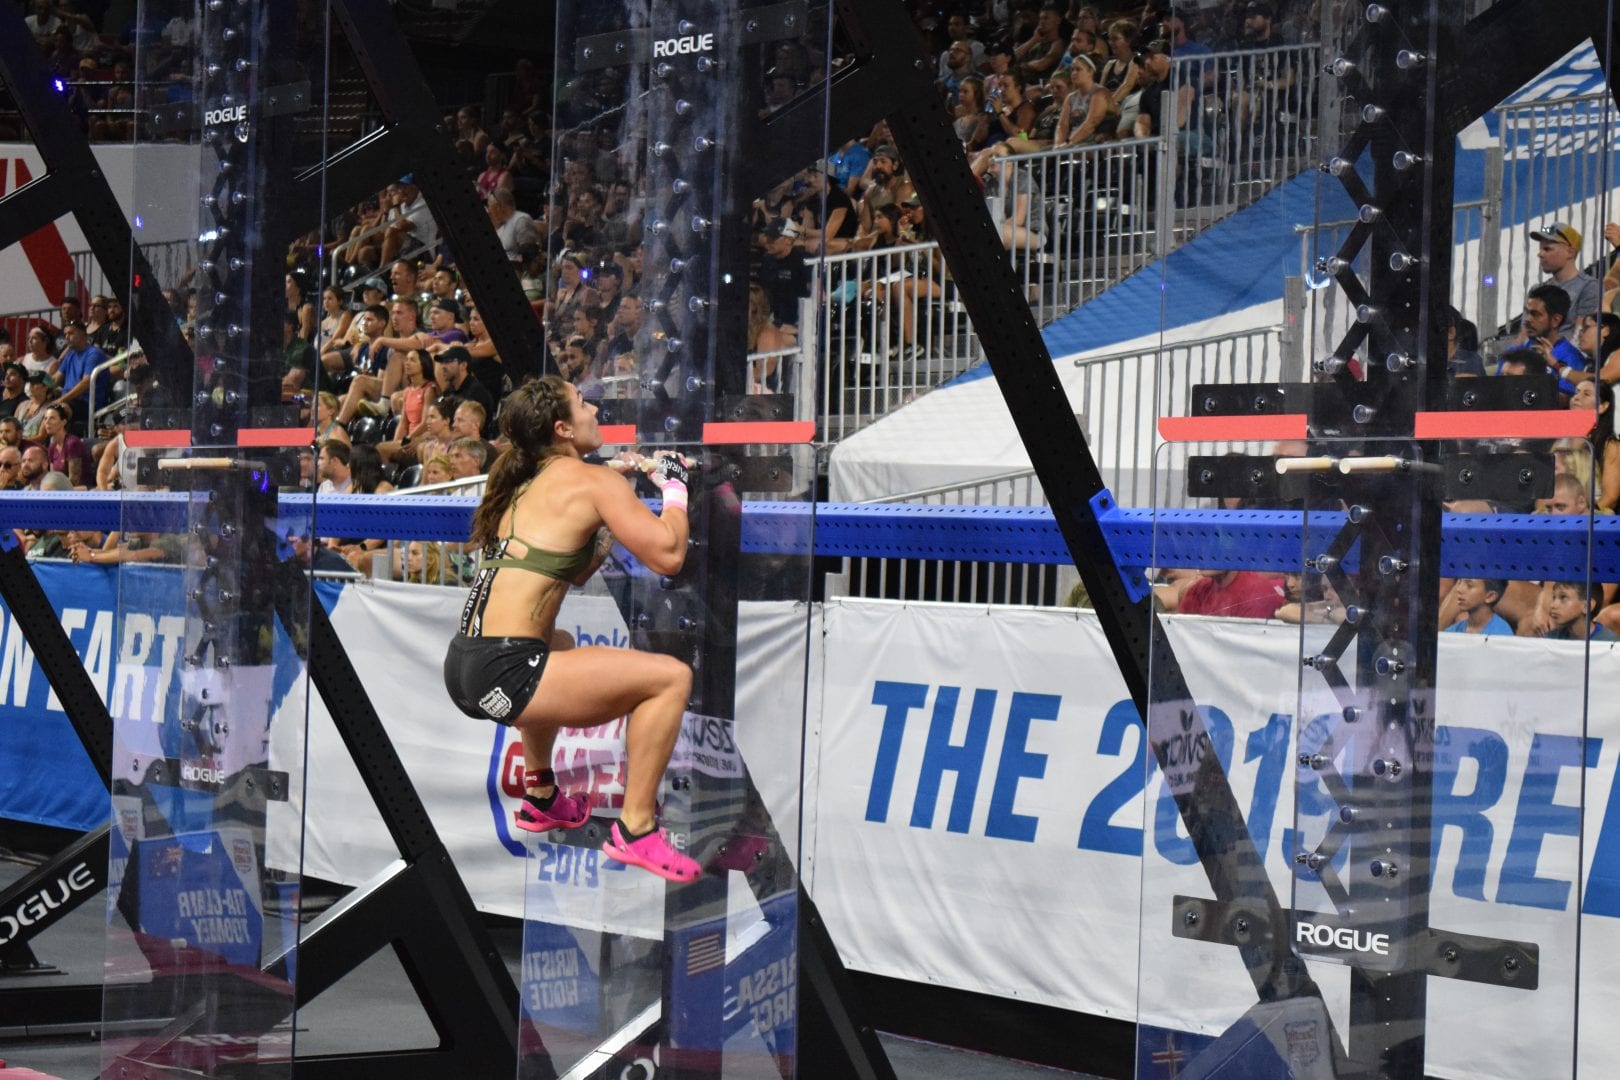 Bethany Shadburne climbs pegboards in the coliseum at the 2019 CrossFit Games.